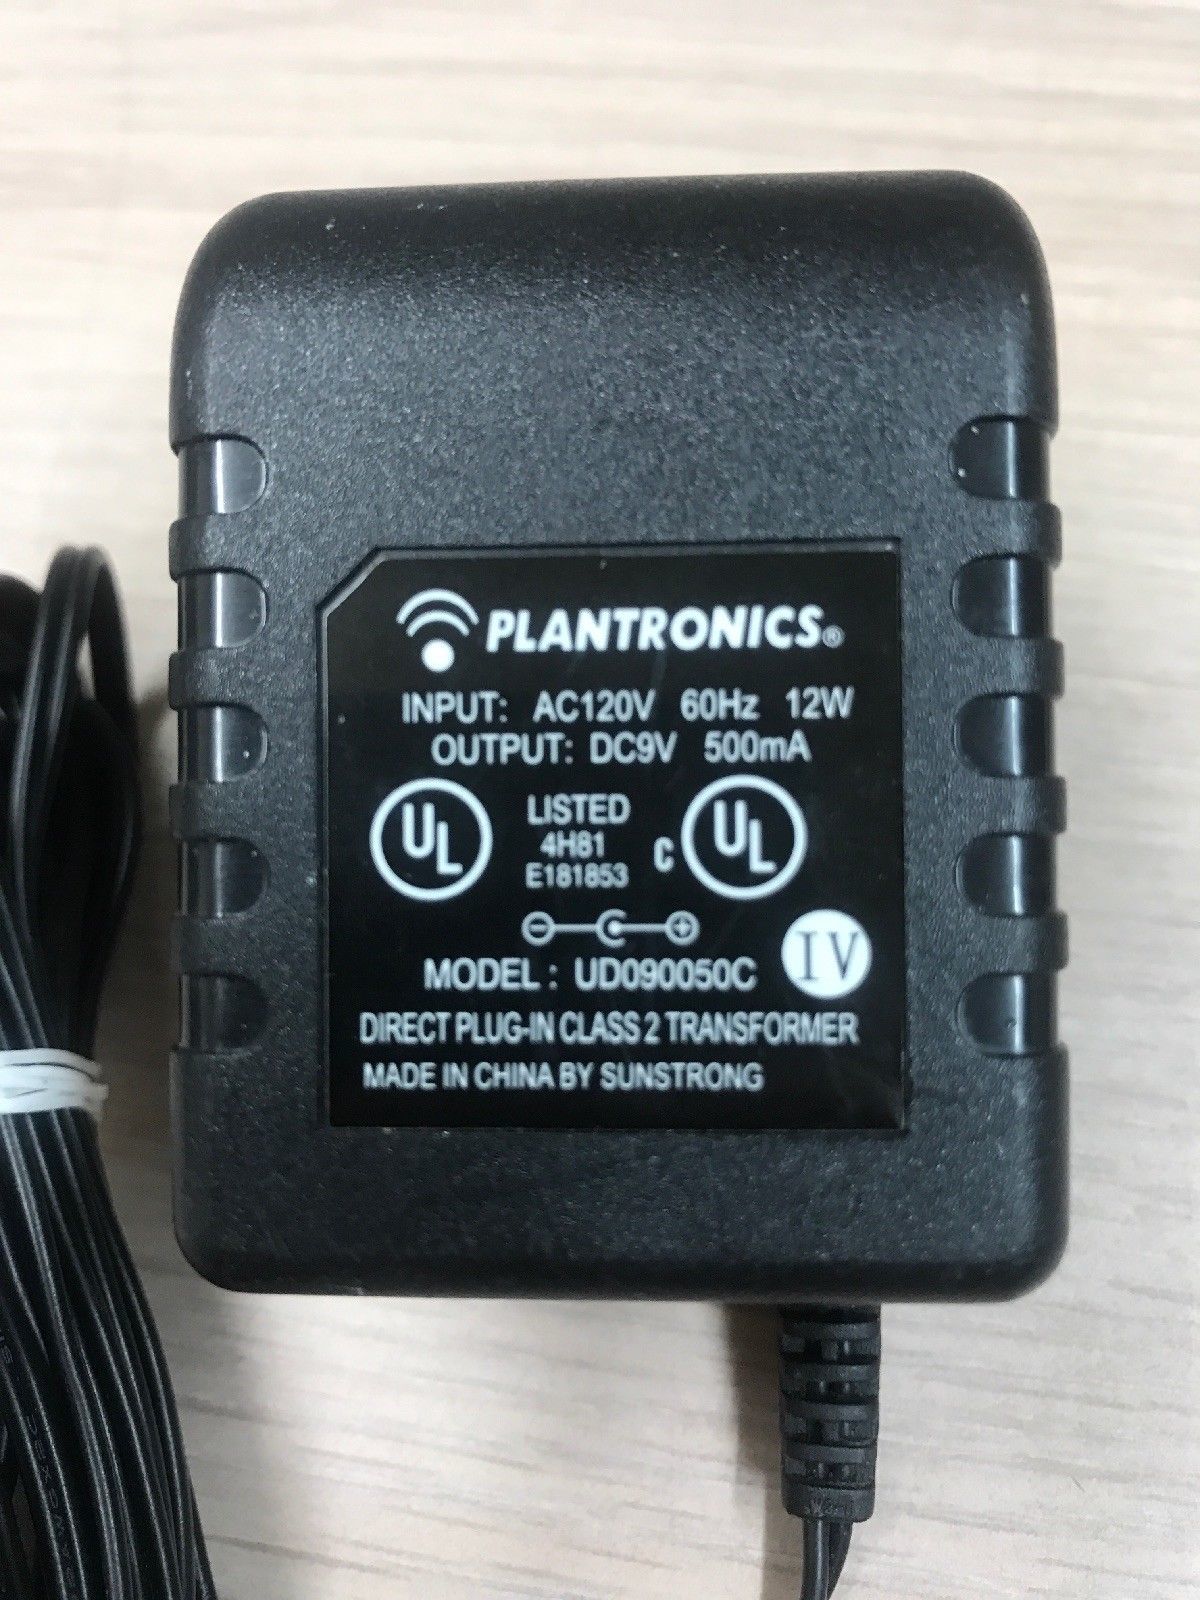 New Plantronics 9VDC 500mA 12W UD090050C AC Power Adapter Charger - Click Image to Close